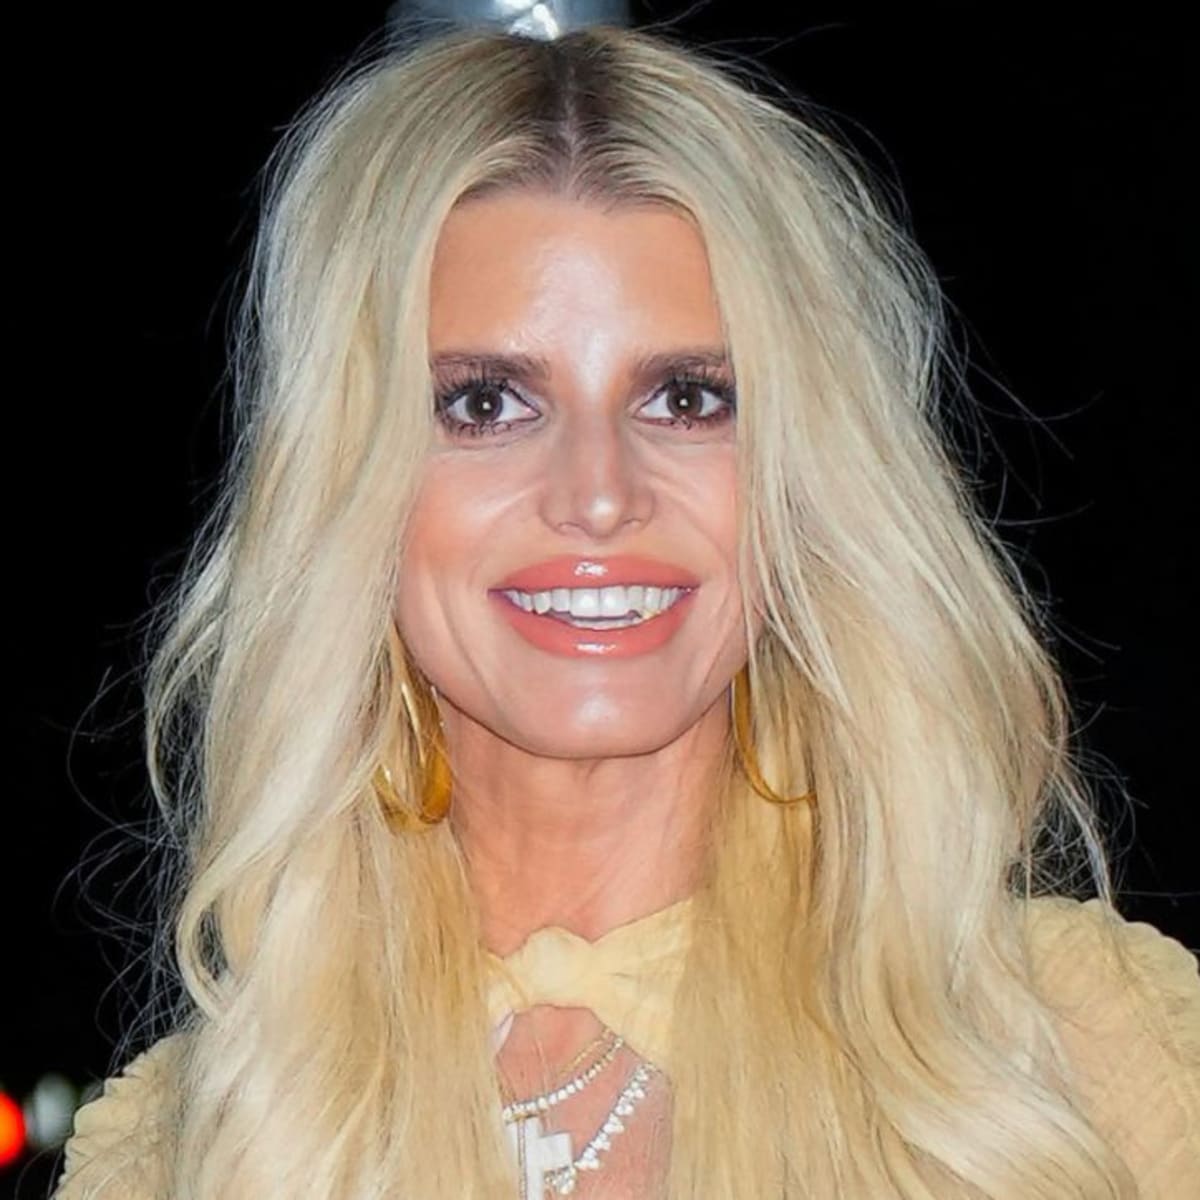 Jessica Simpson Speaks Out on How Filters Are Distorting Beauty